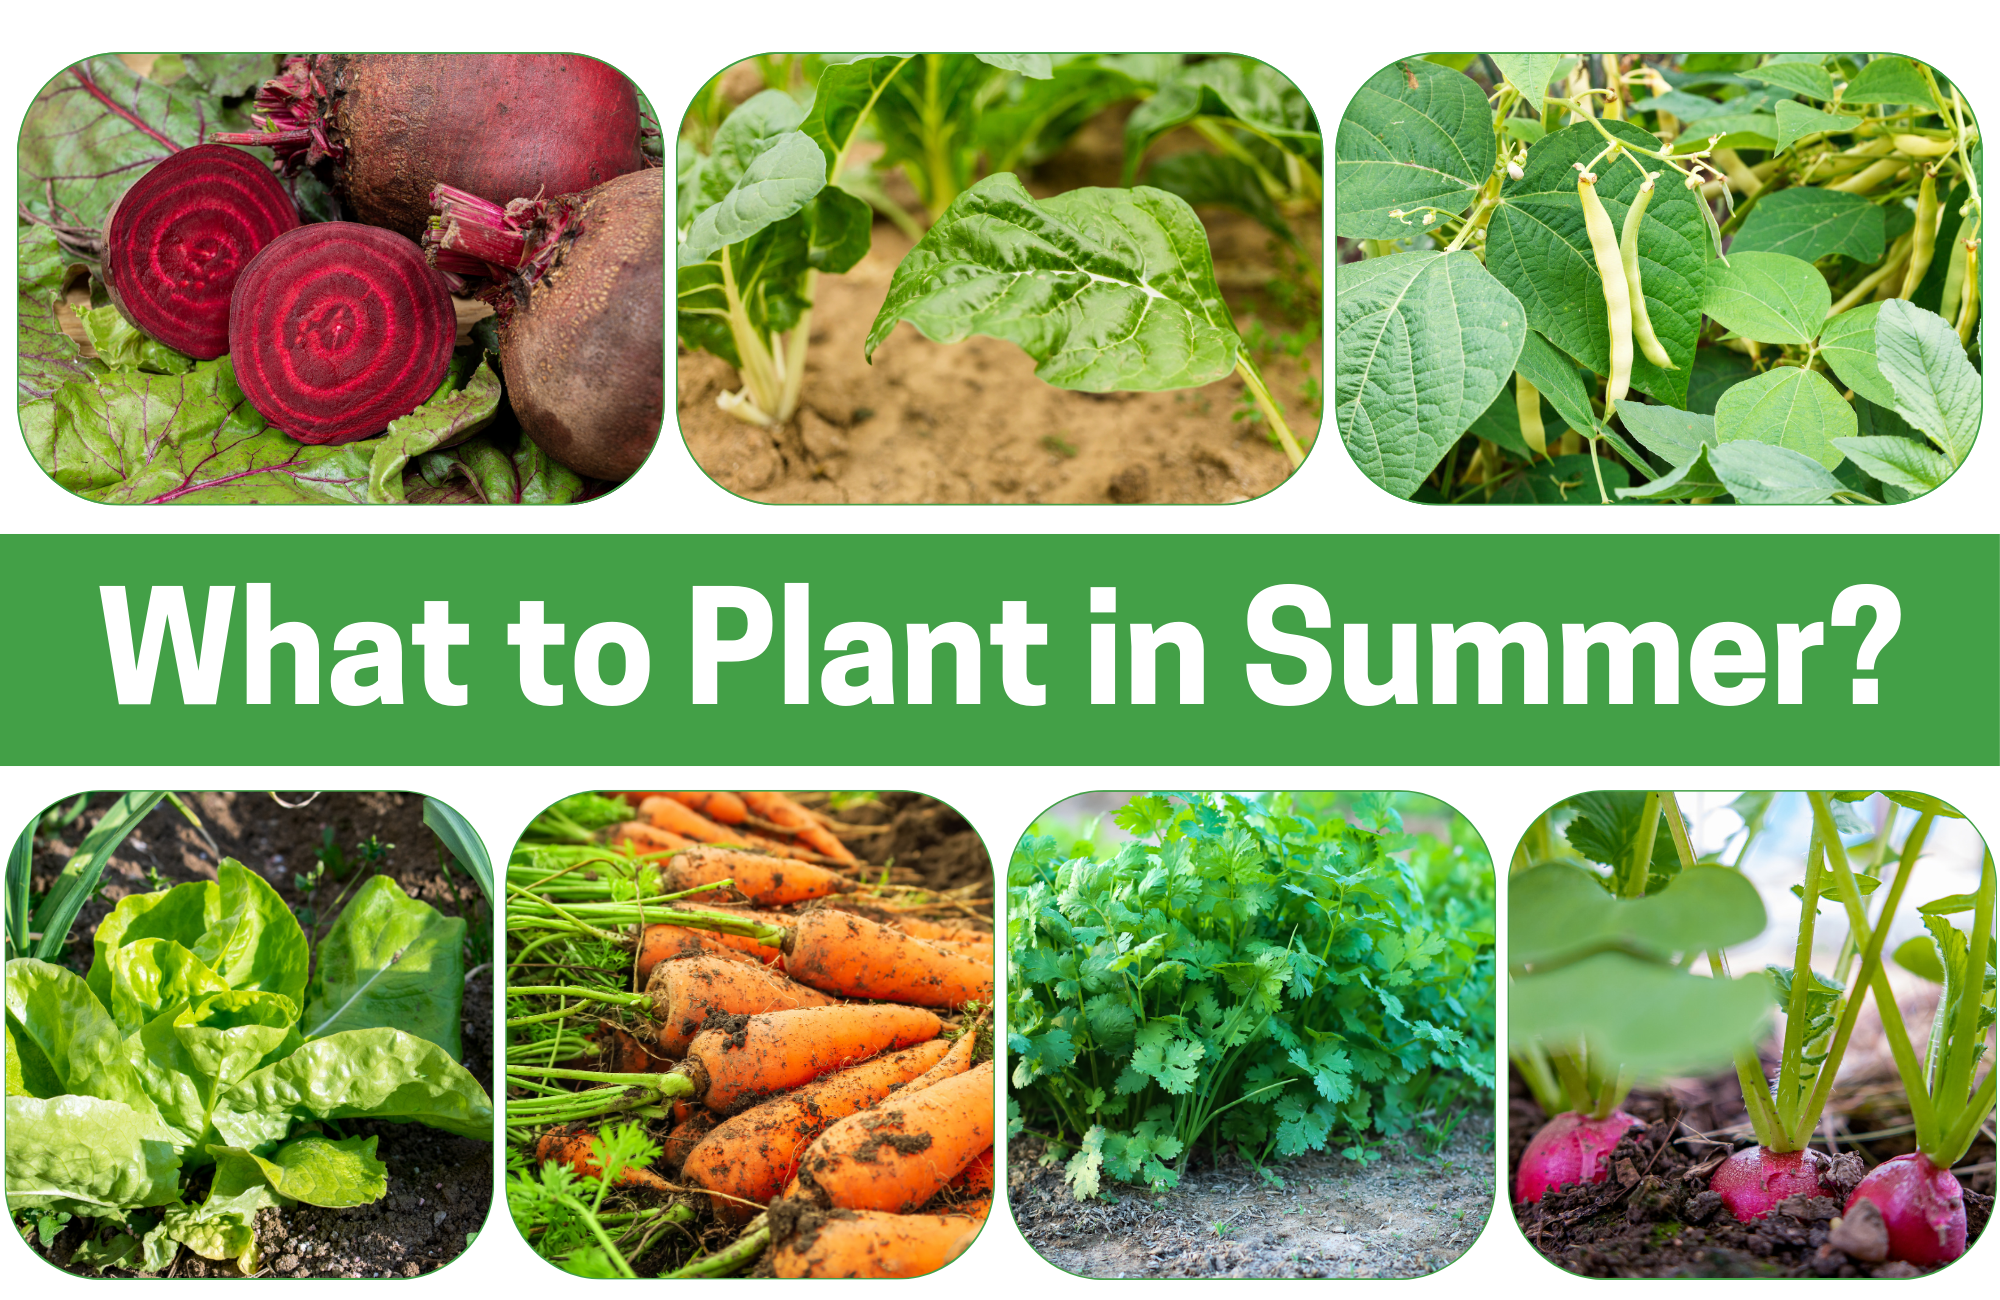 A collage of plant images with the words "What to Plant in Summer?"